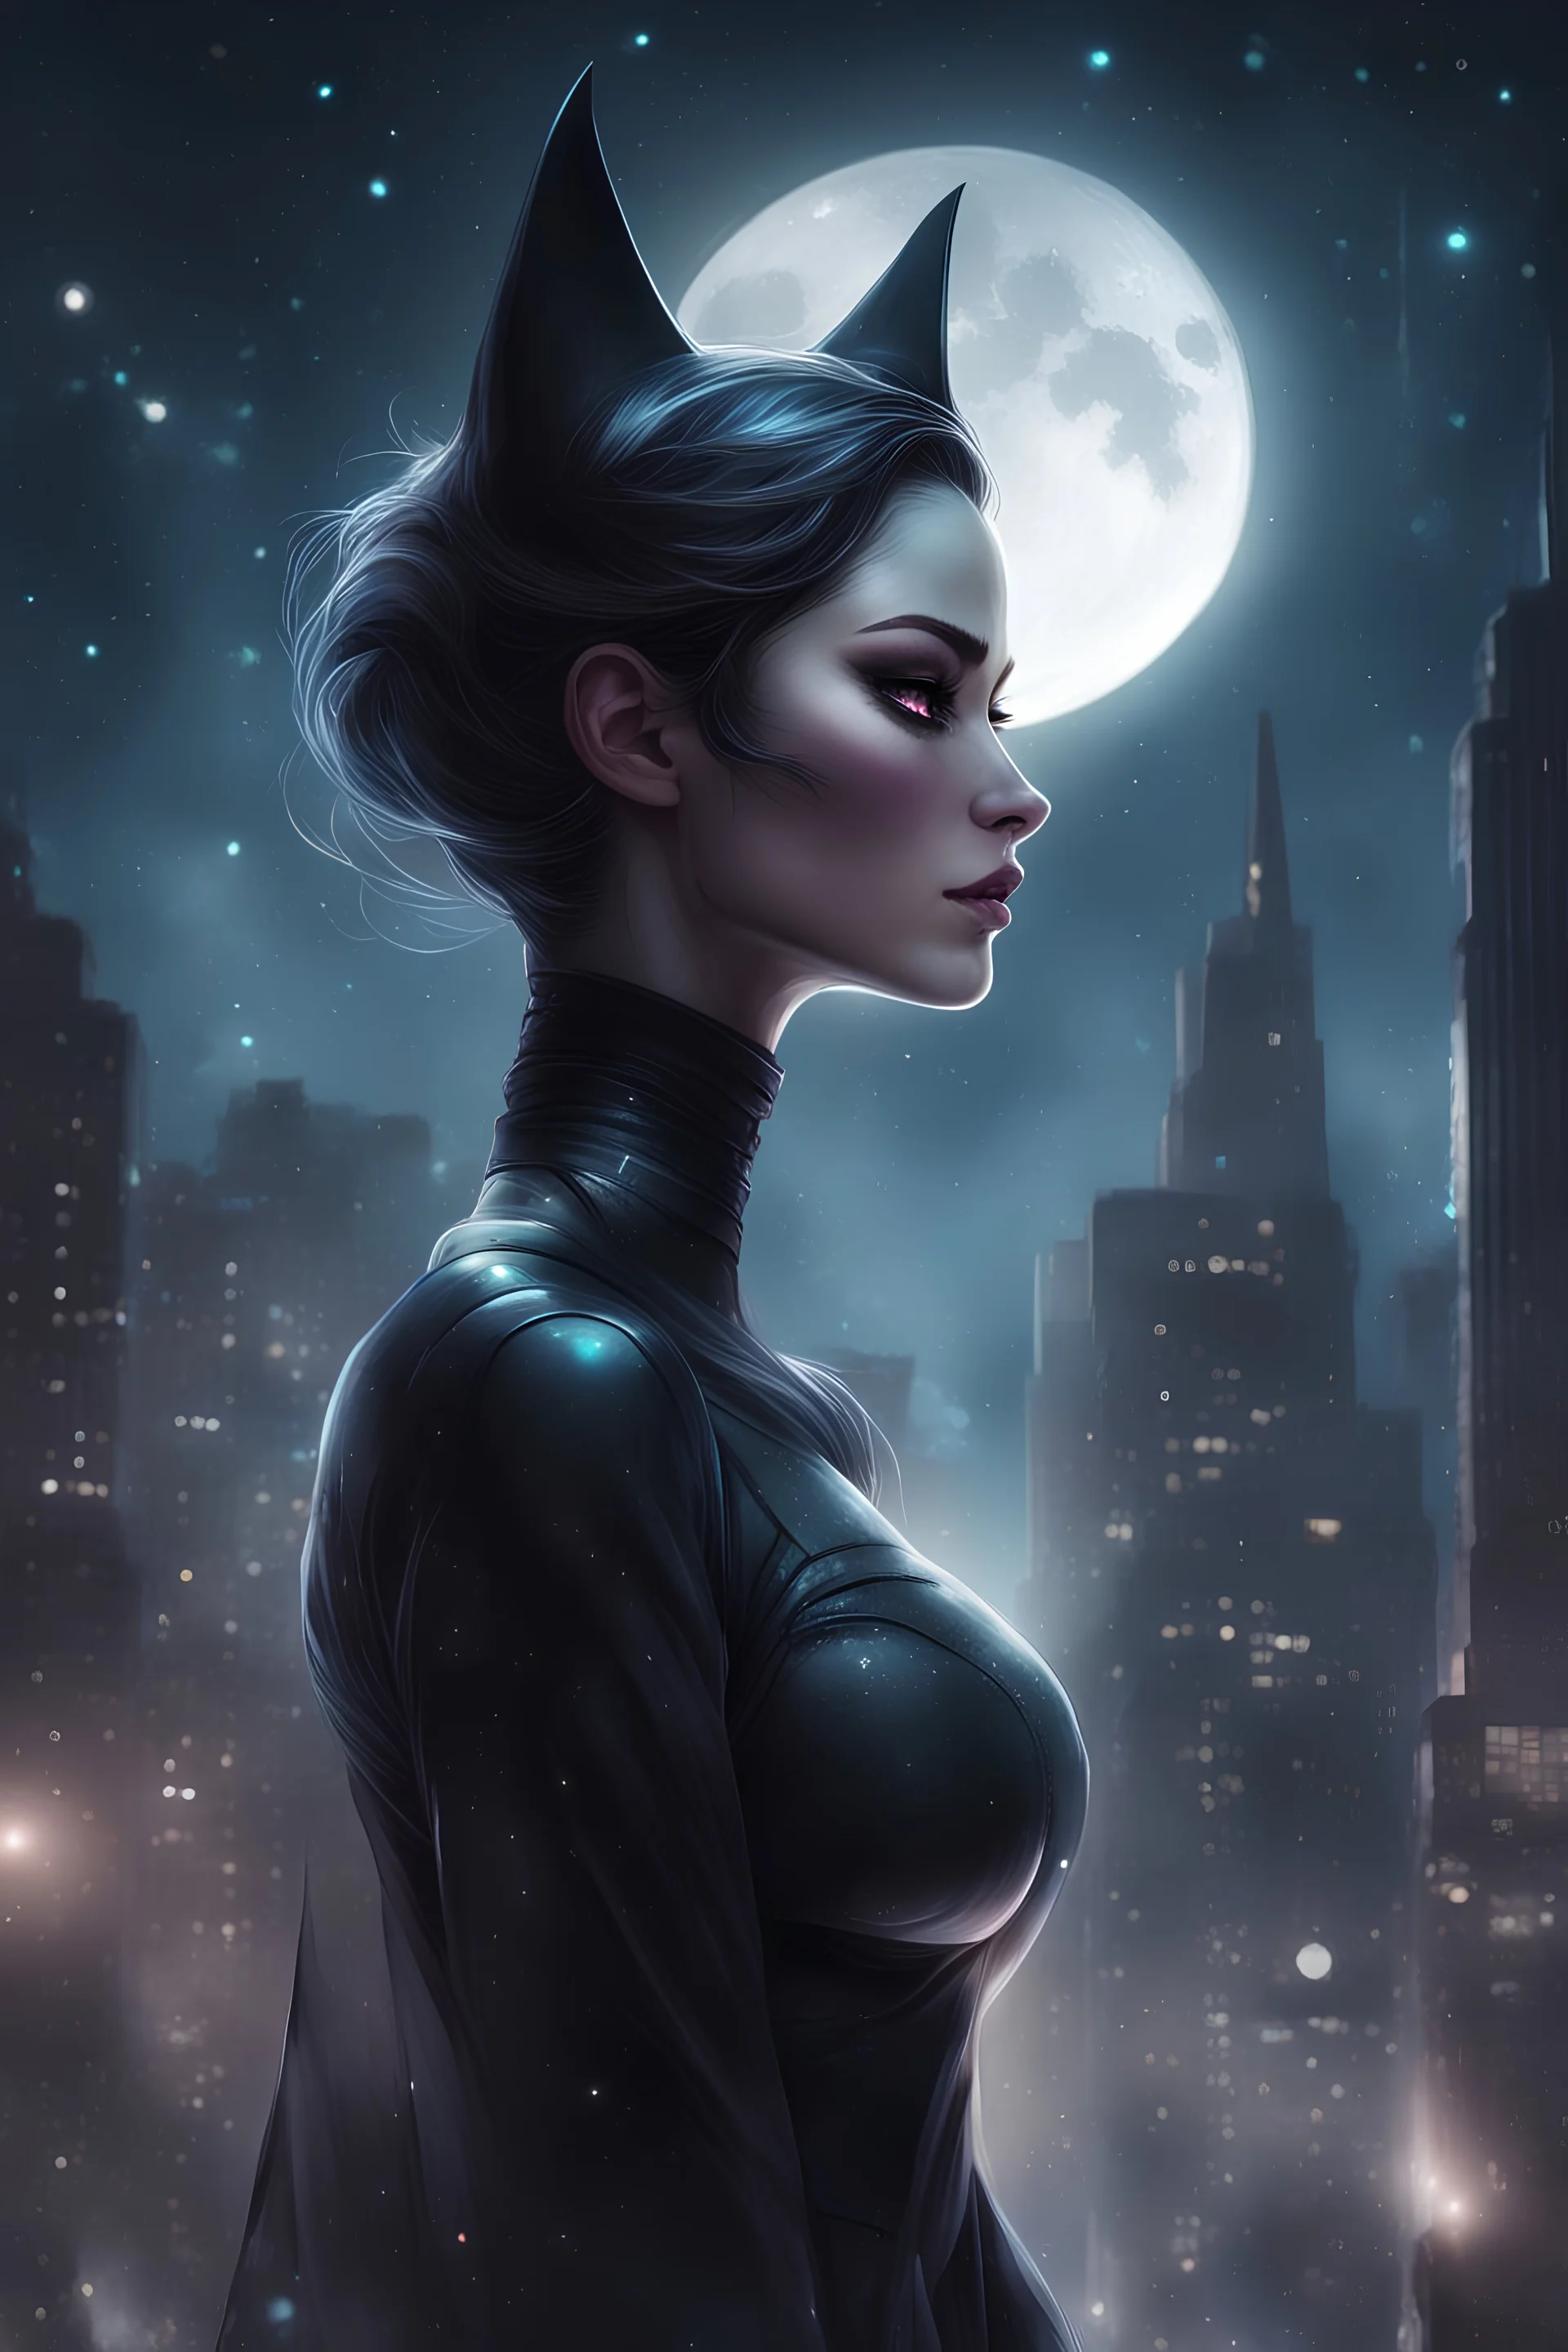 black style, mystical, transparent, ghost catwoman, milky way, moon, behind the night city, Trending on Artstation, {creative commons}, fanart, AIart, {Woolitize}, by Charlie Bowater, Illustration, Color Grading, Filmic, Nikon D750, Brenizer Method, Side-View, Perspective, Depth of Field, Field of View, F/2.8, Lens Flare, Tonal Colors, 8K, Full-HD, ProPhoto RGB, Perfectionism, Rim Lighting, Natural Lighting, Soft Lighting, Accent Lighting, Diffraction Grading, With Imperfections, insa